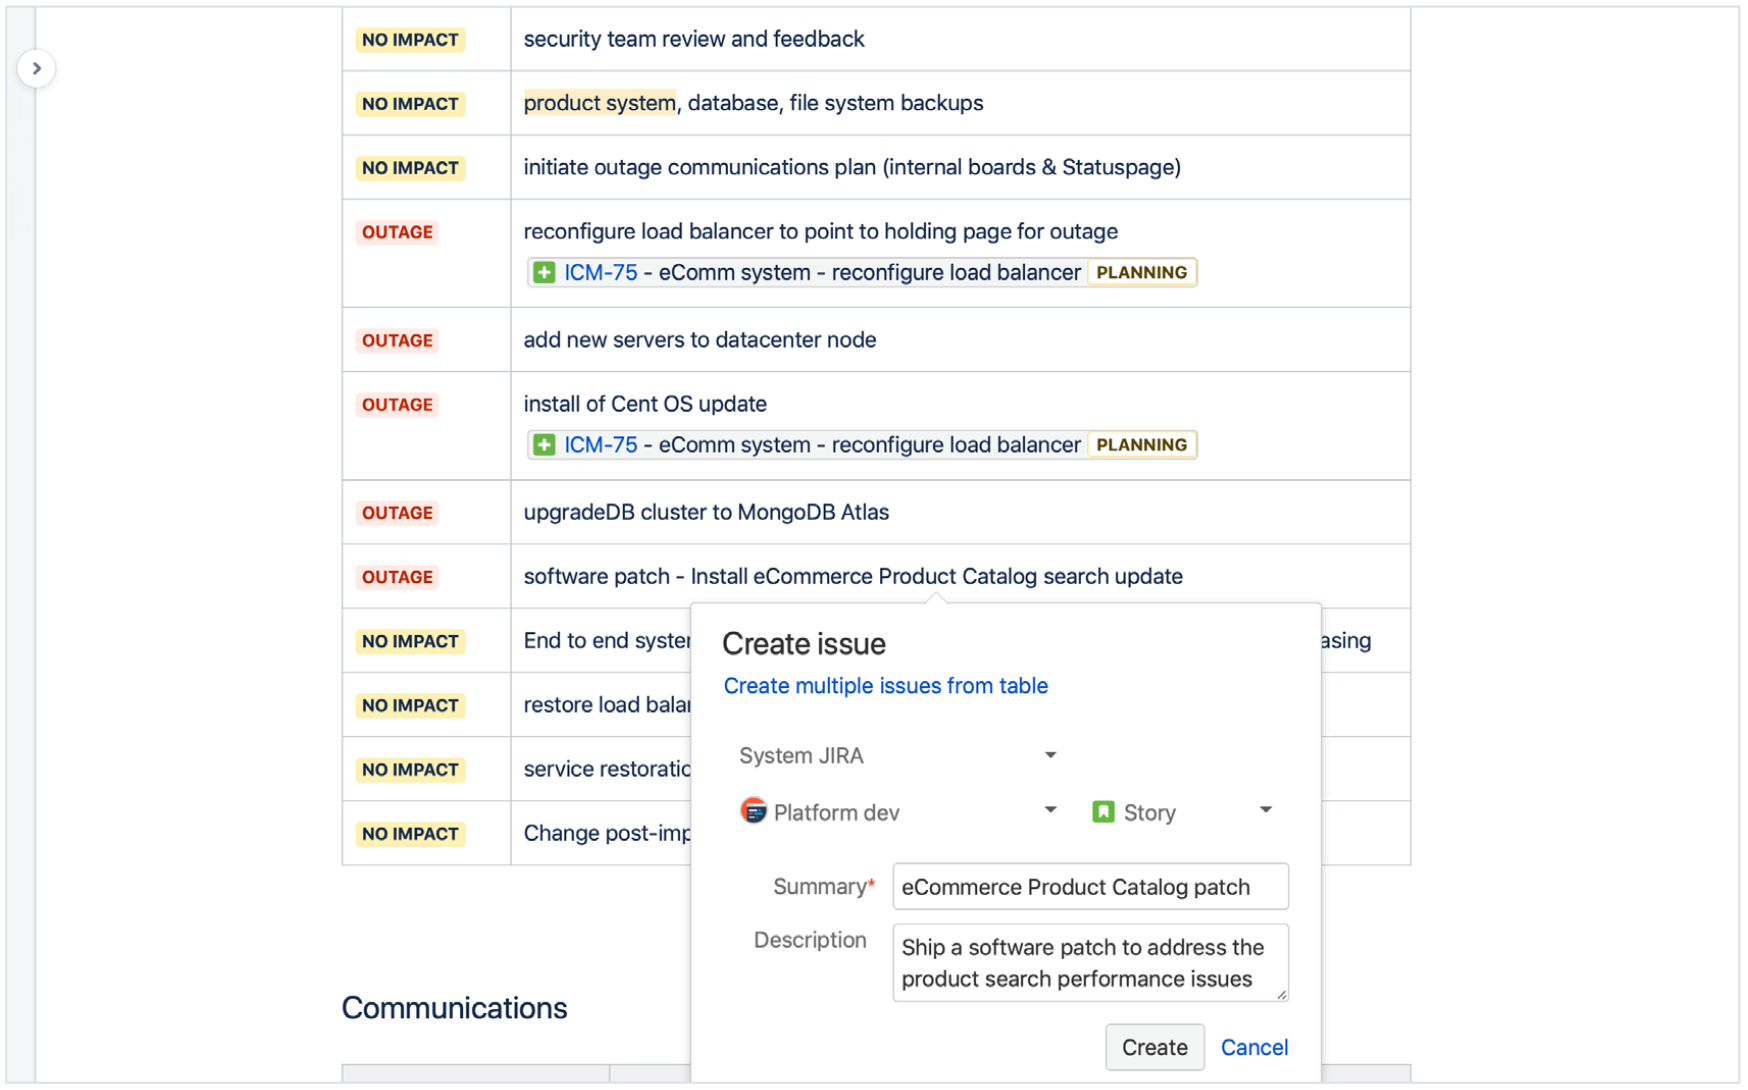 Breaking down a major change into smaller tasks and pre-changes in Jira Service management